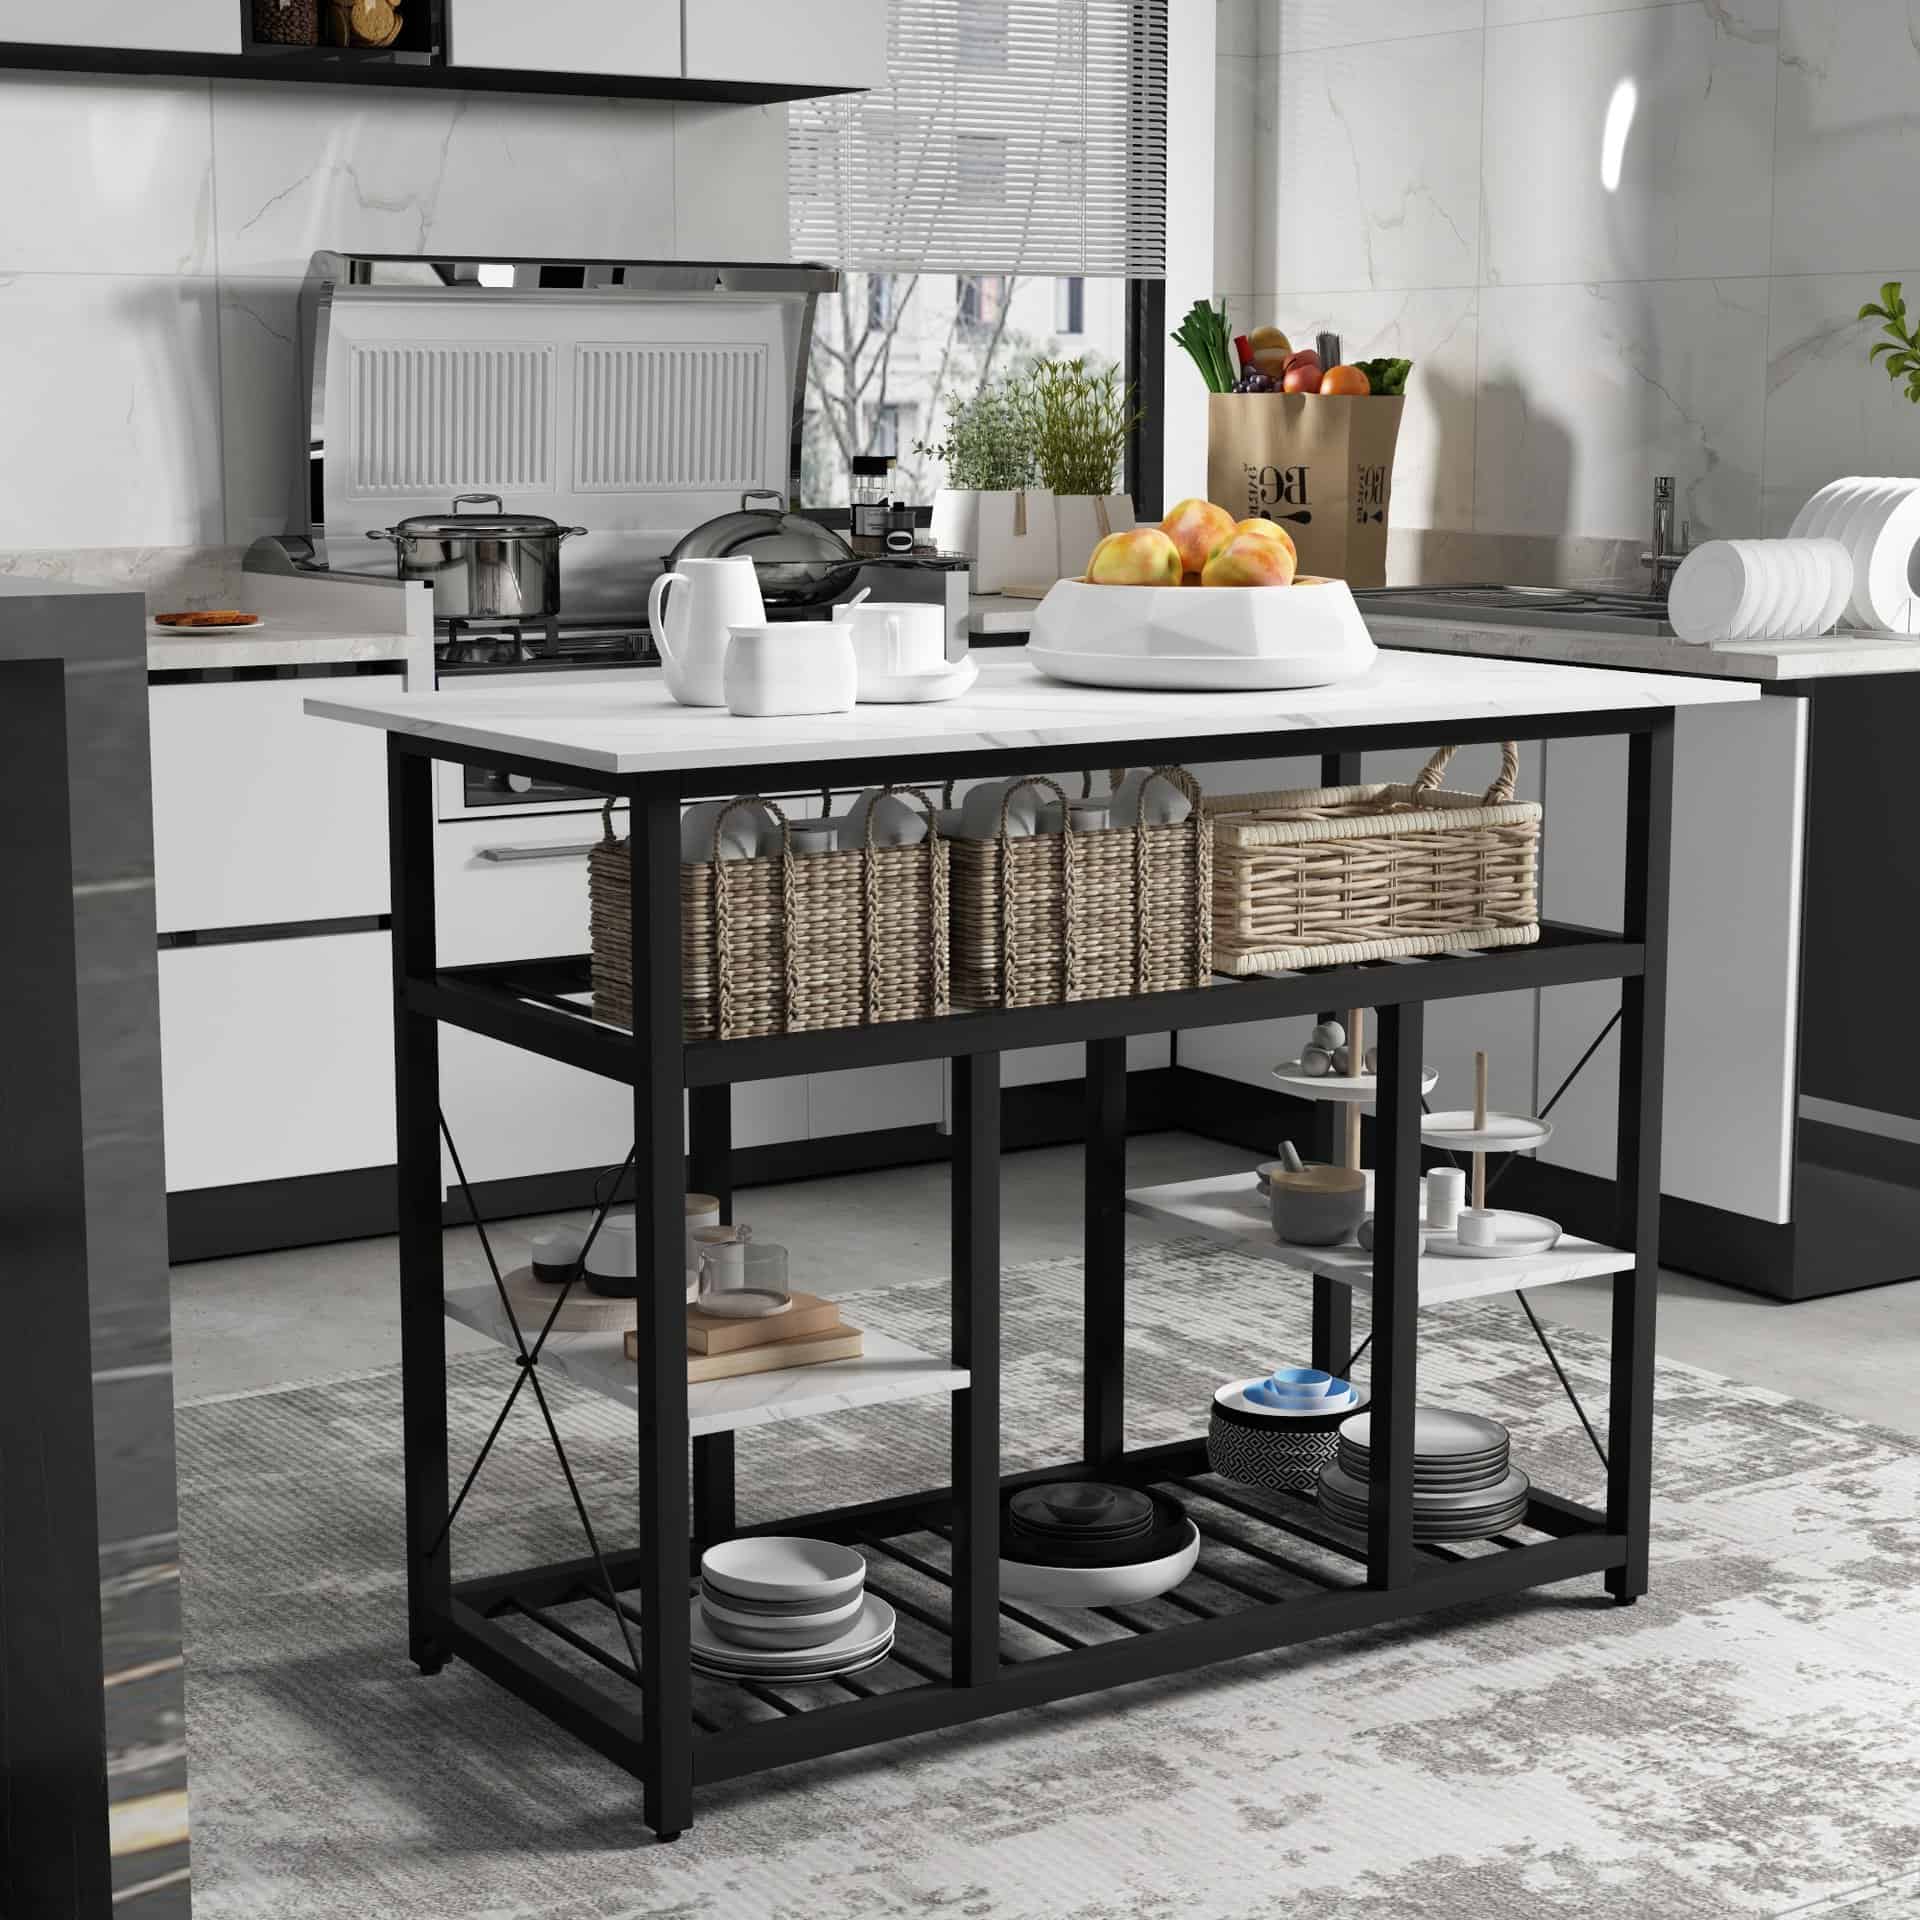 Contemporary Kitchen Table With Storage